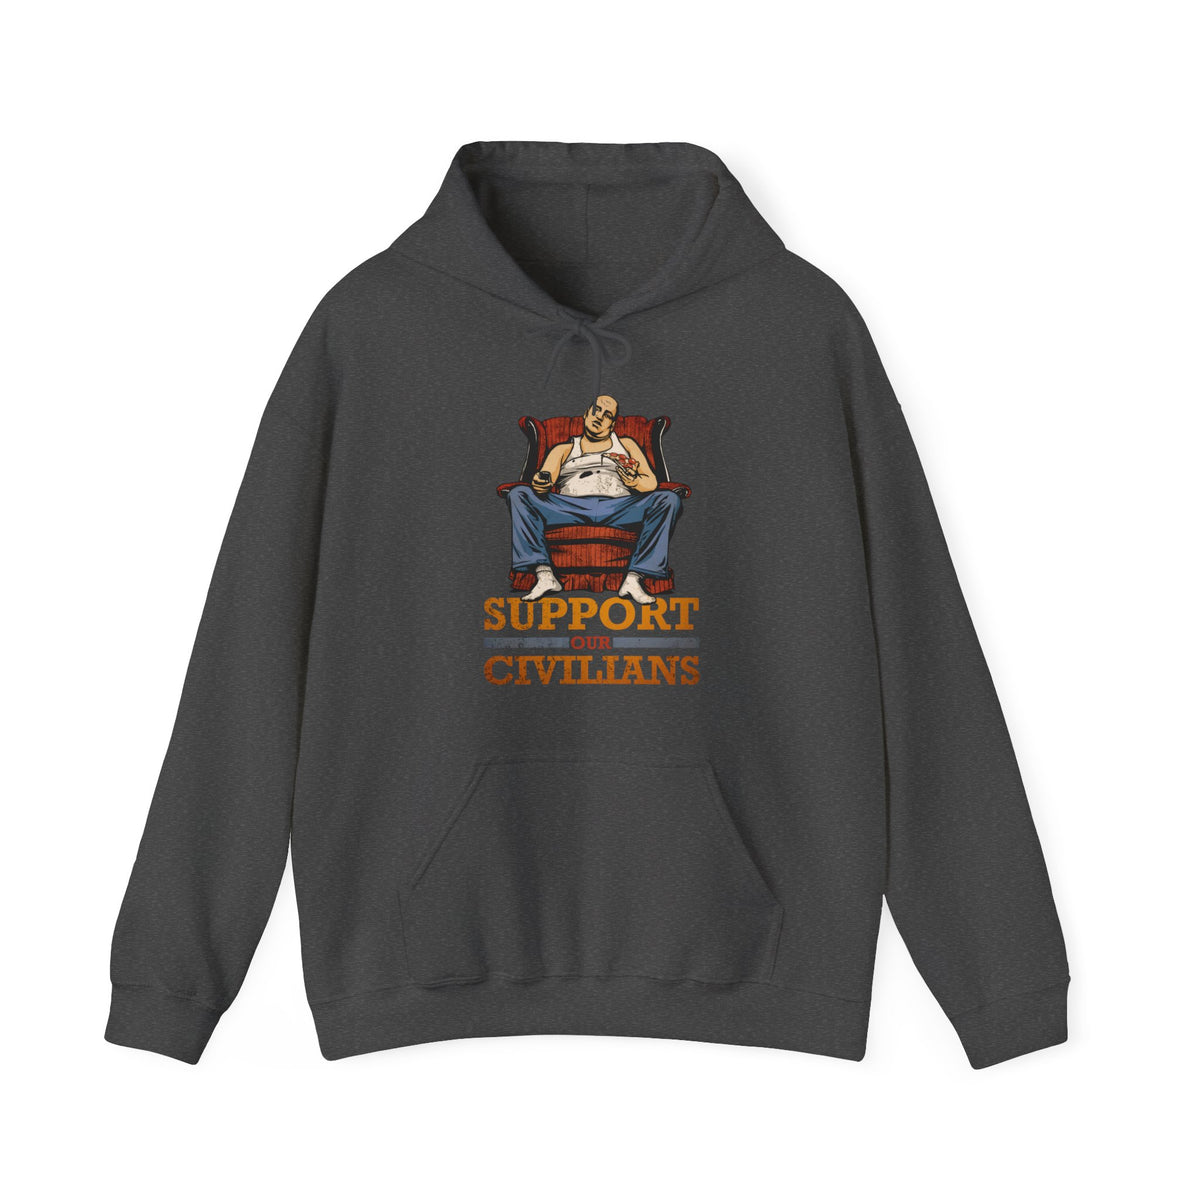 Support Our Civilians - Hoodie